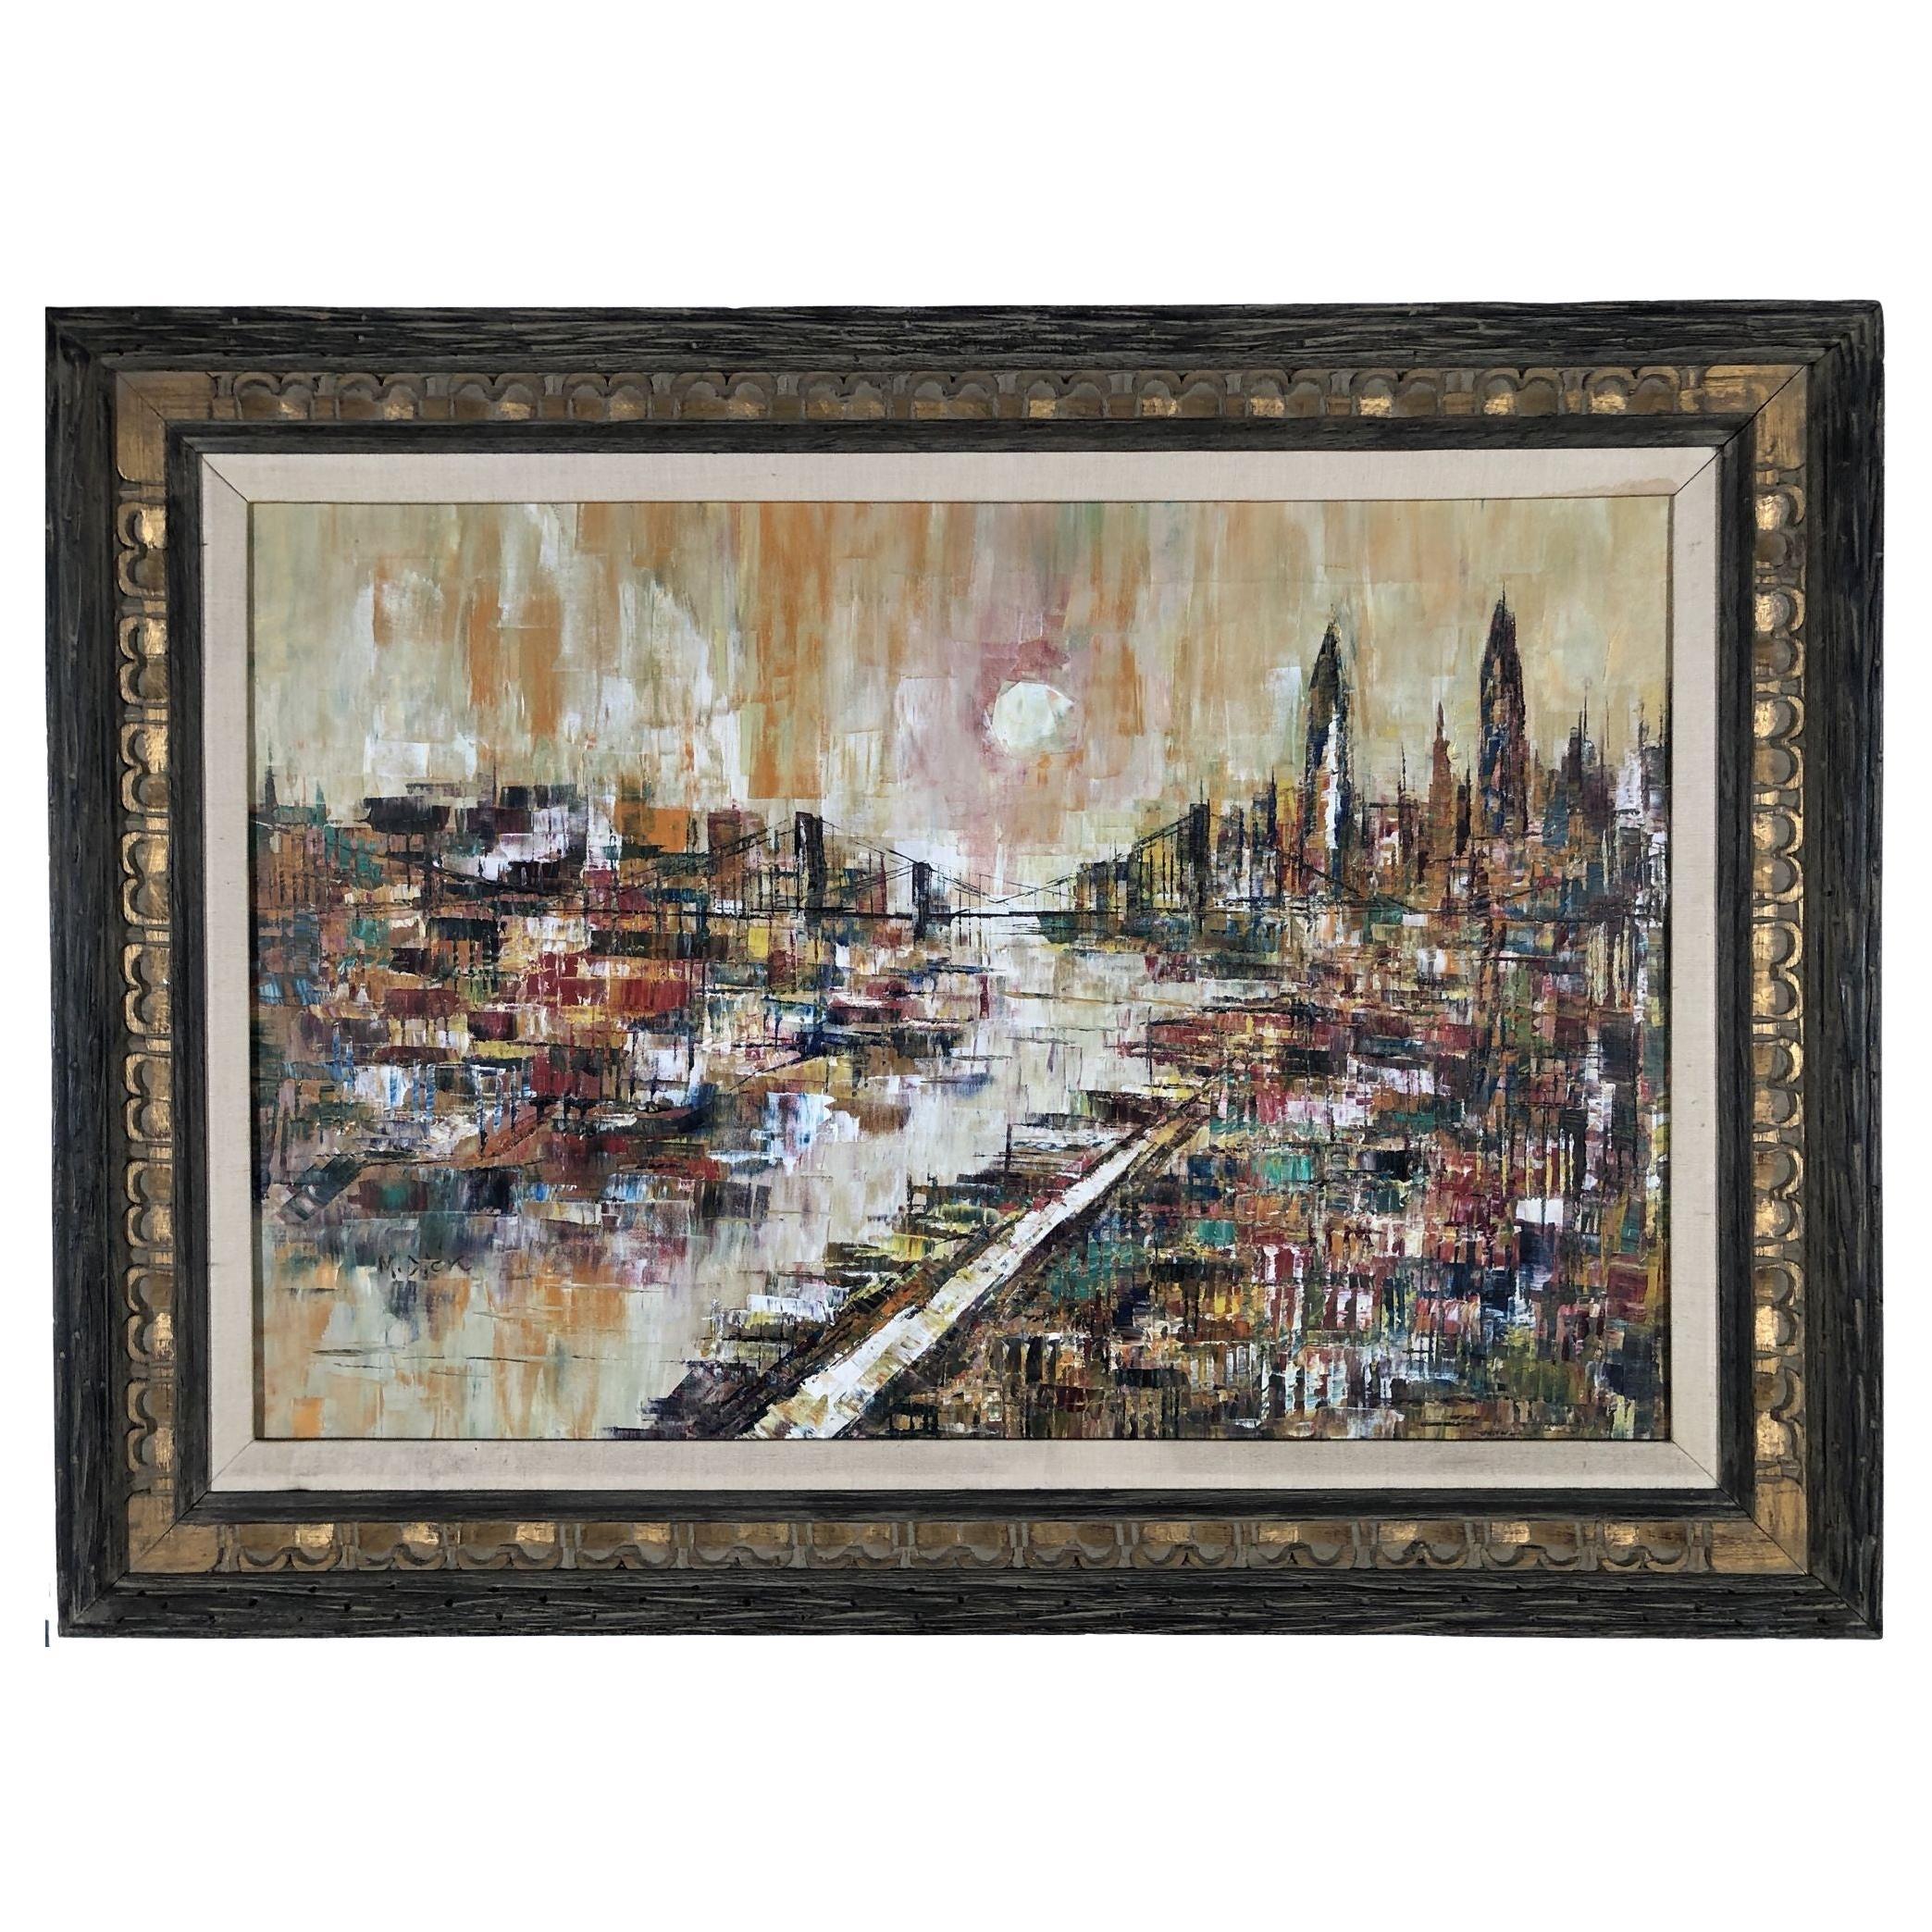 Framed Mid-Century Oil Painting of Bridge and Cityscape Signed by M. Dick For Sale